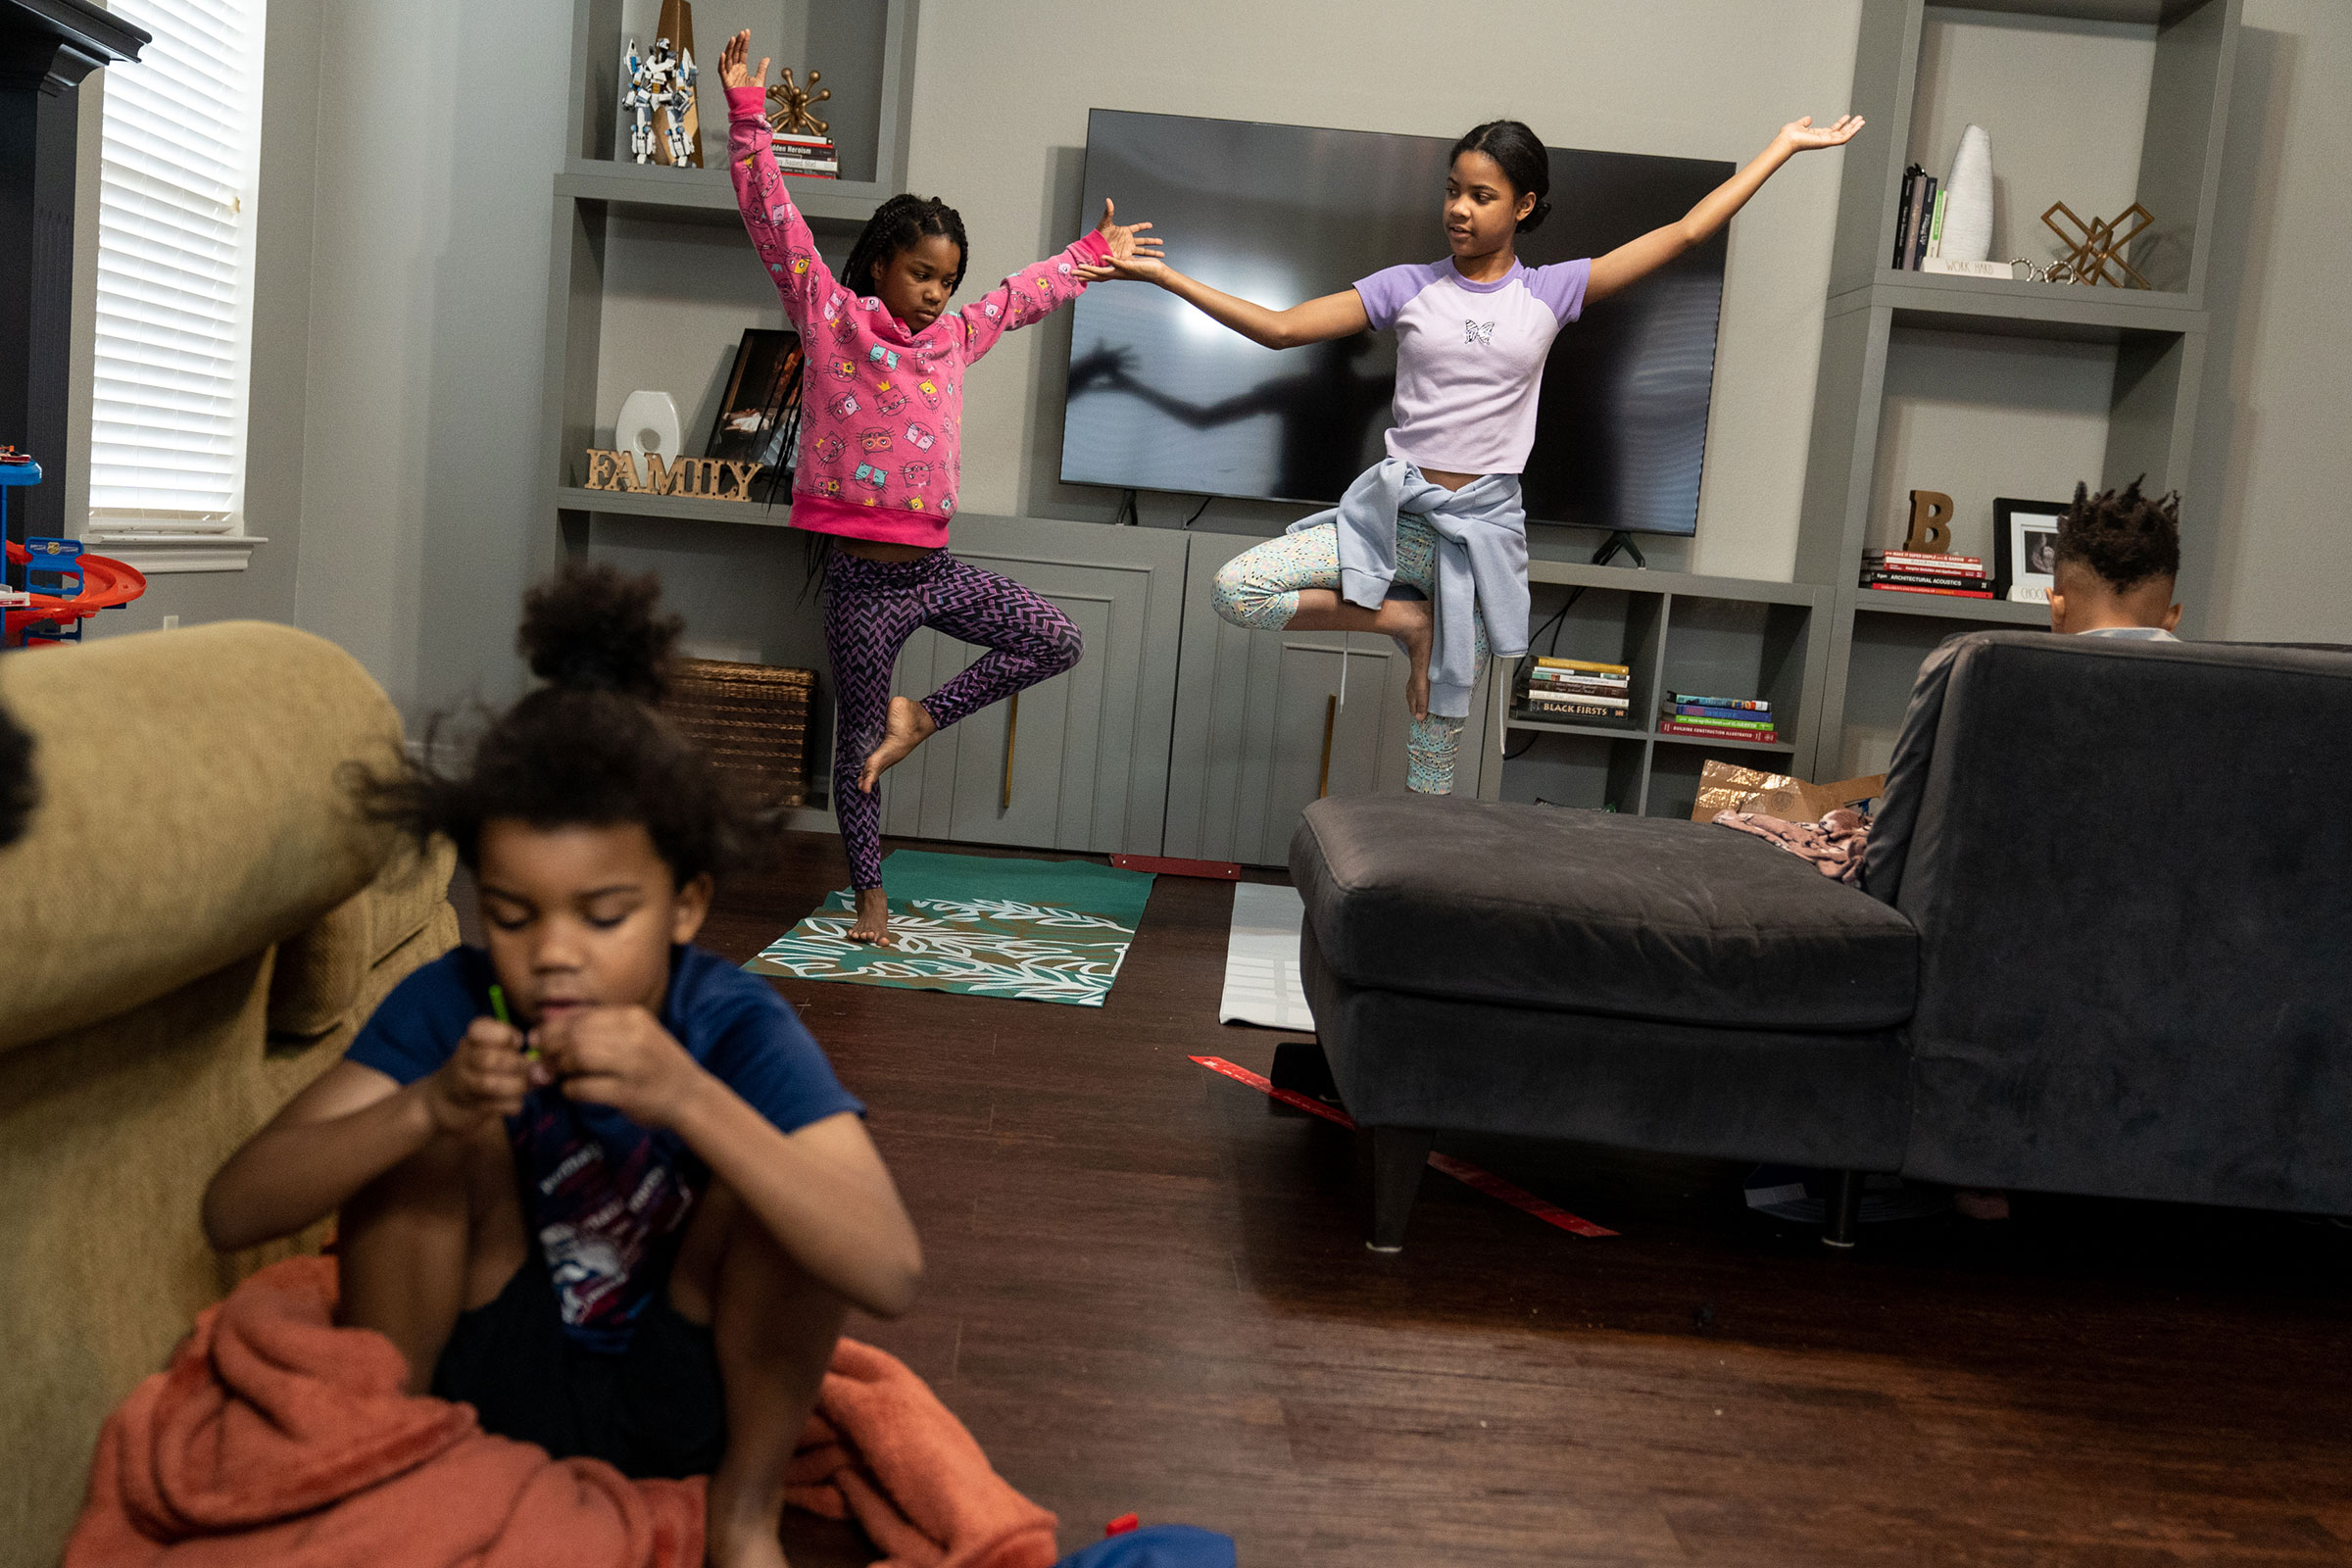 Bellamy, 8, and Brea, 12, do yoga in the living room. (Ilana Panich-Linsman for TIME)